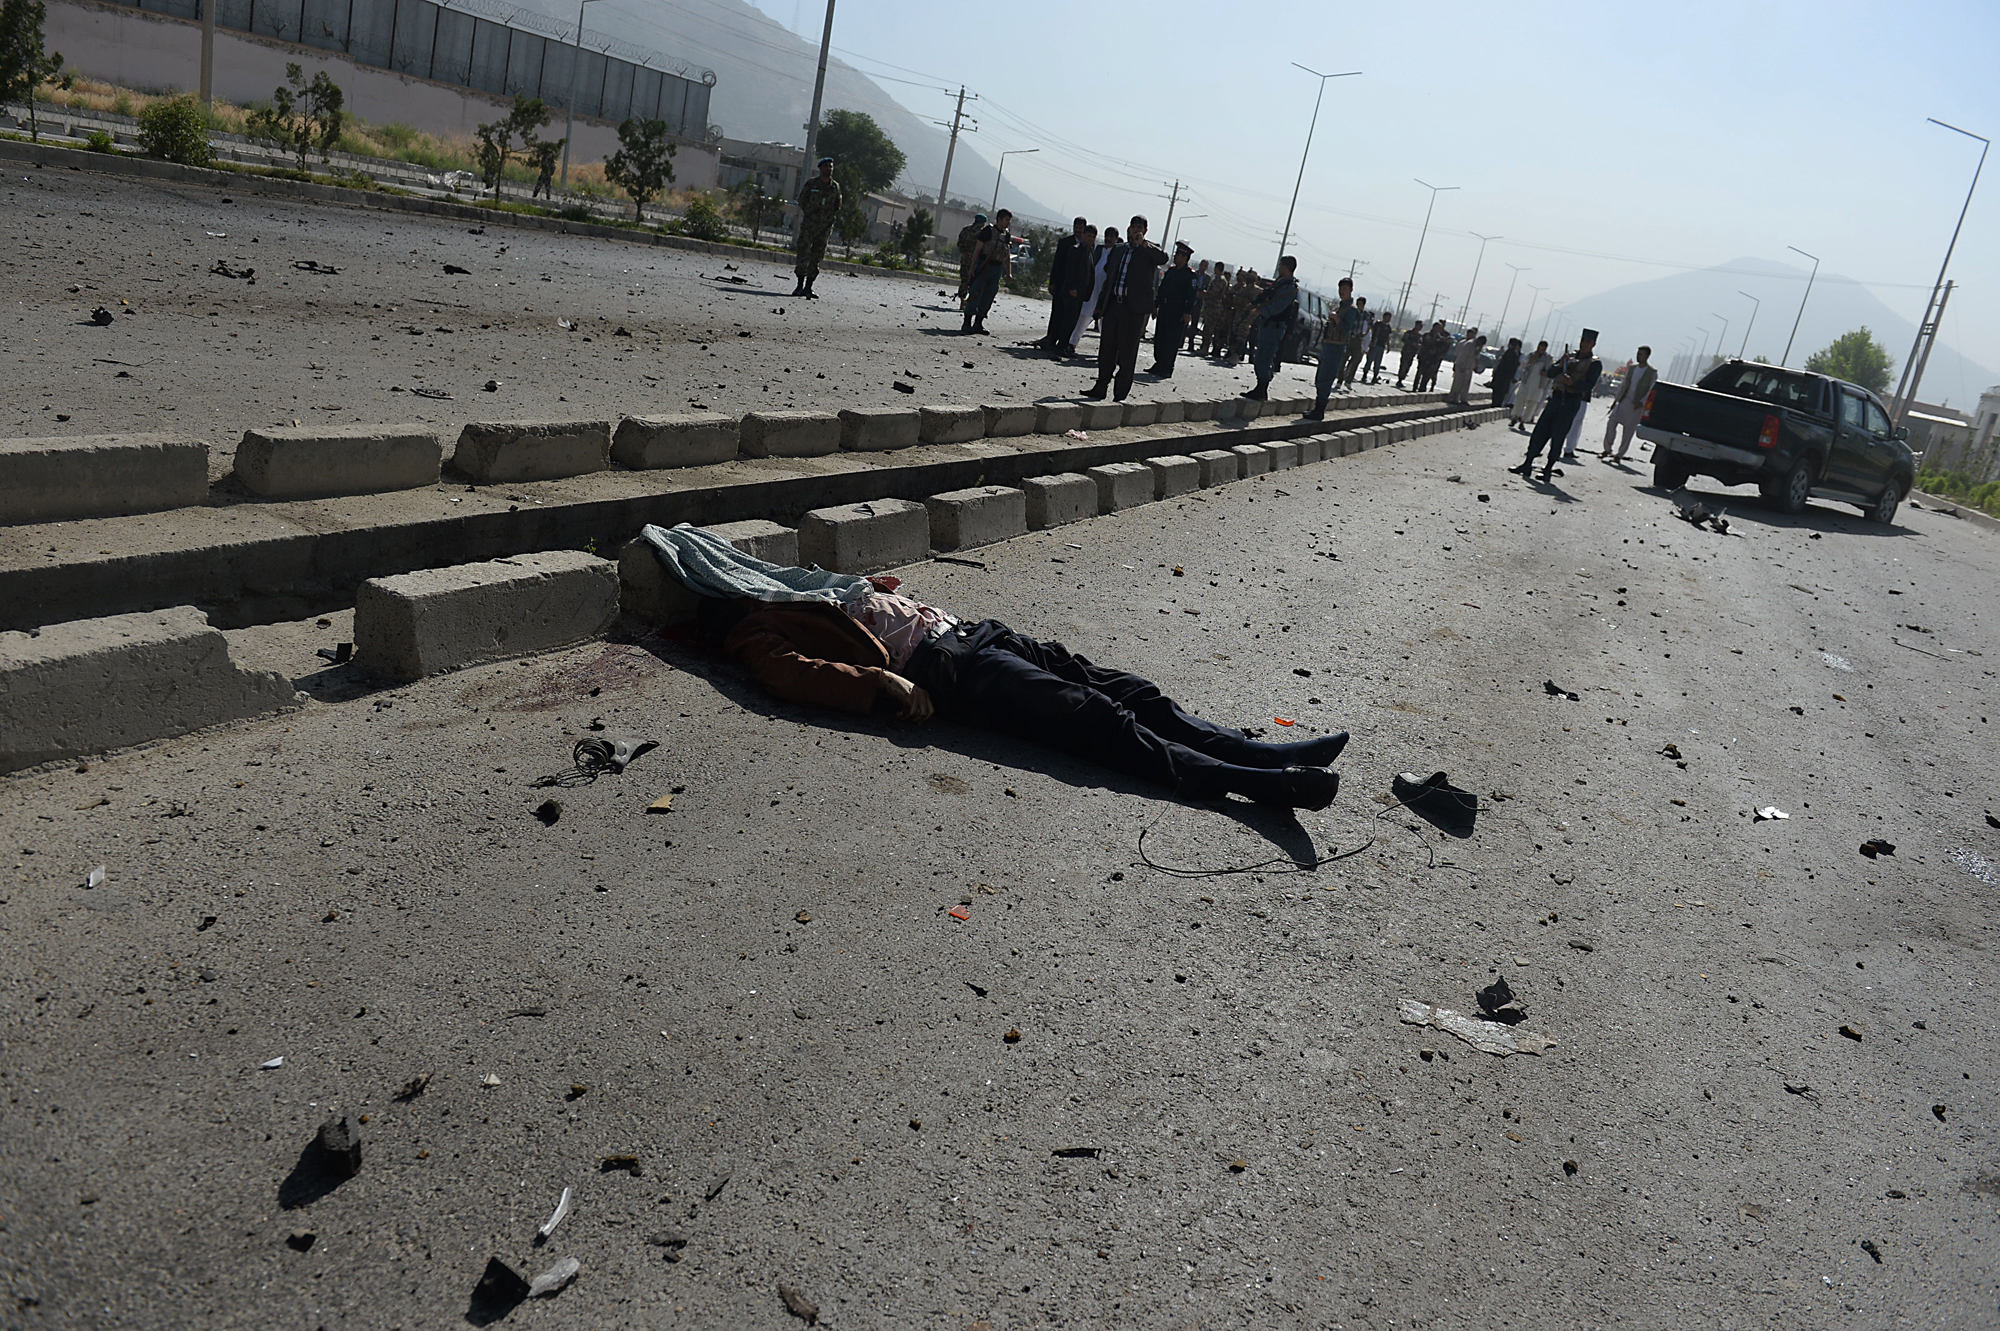 A victim's body lies on the road as Afghan security forces inspect the site of a suicide attack in Kabul on June 21, 2014.